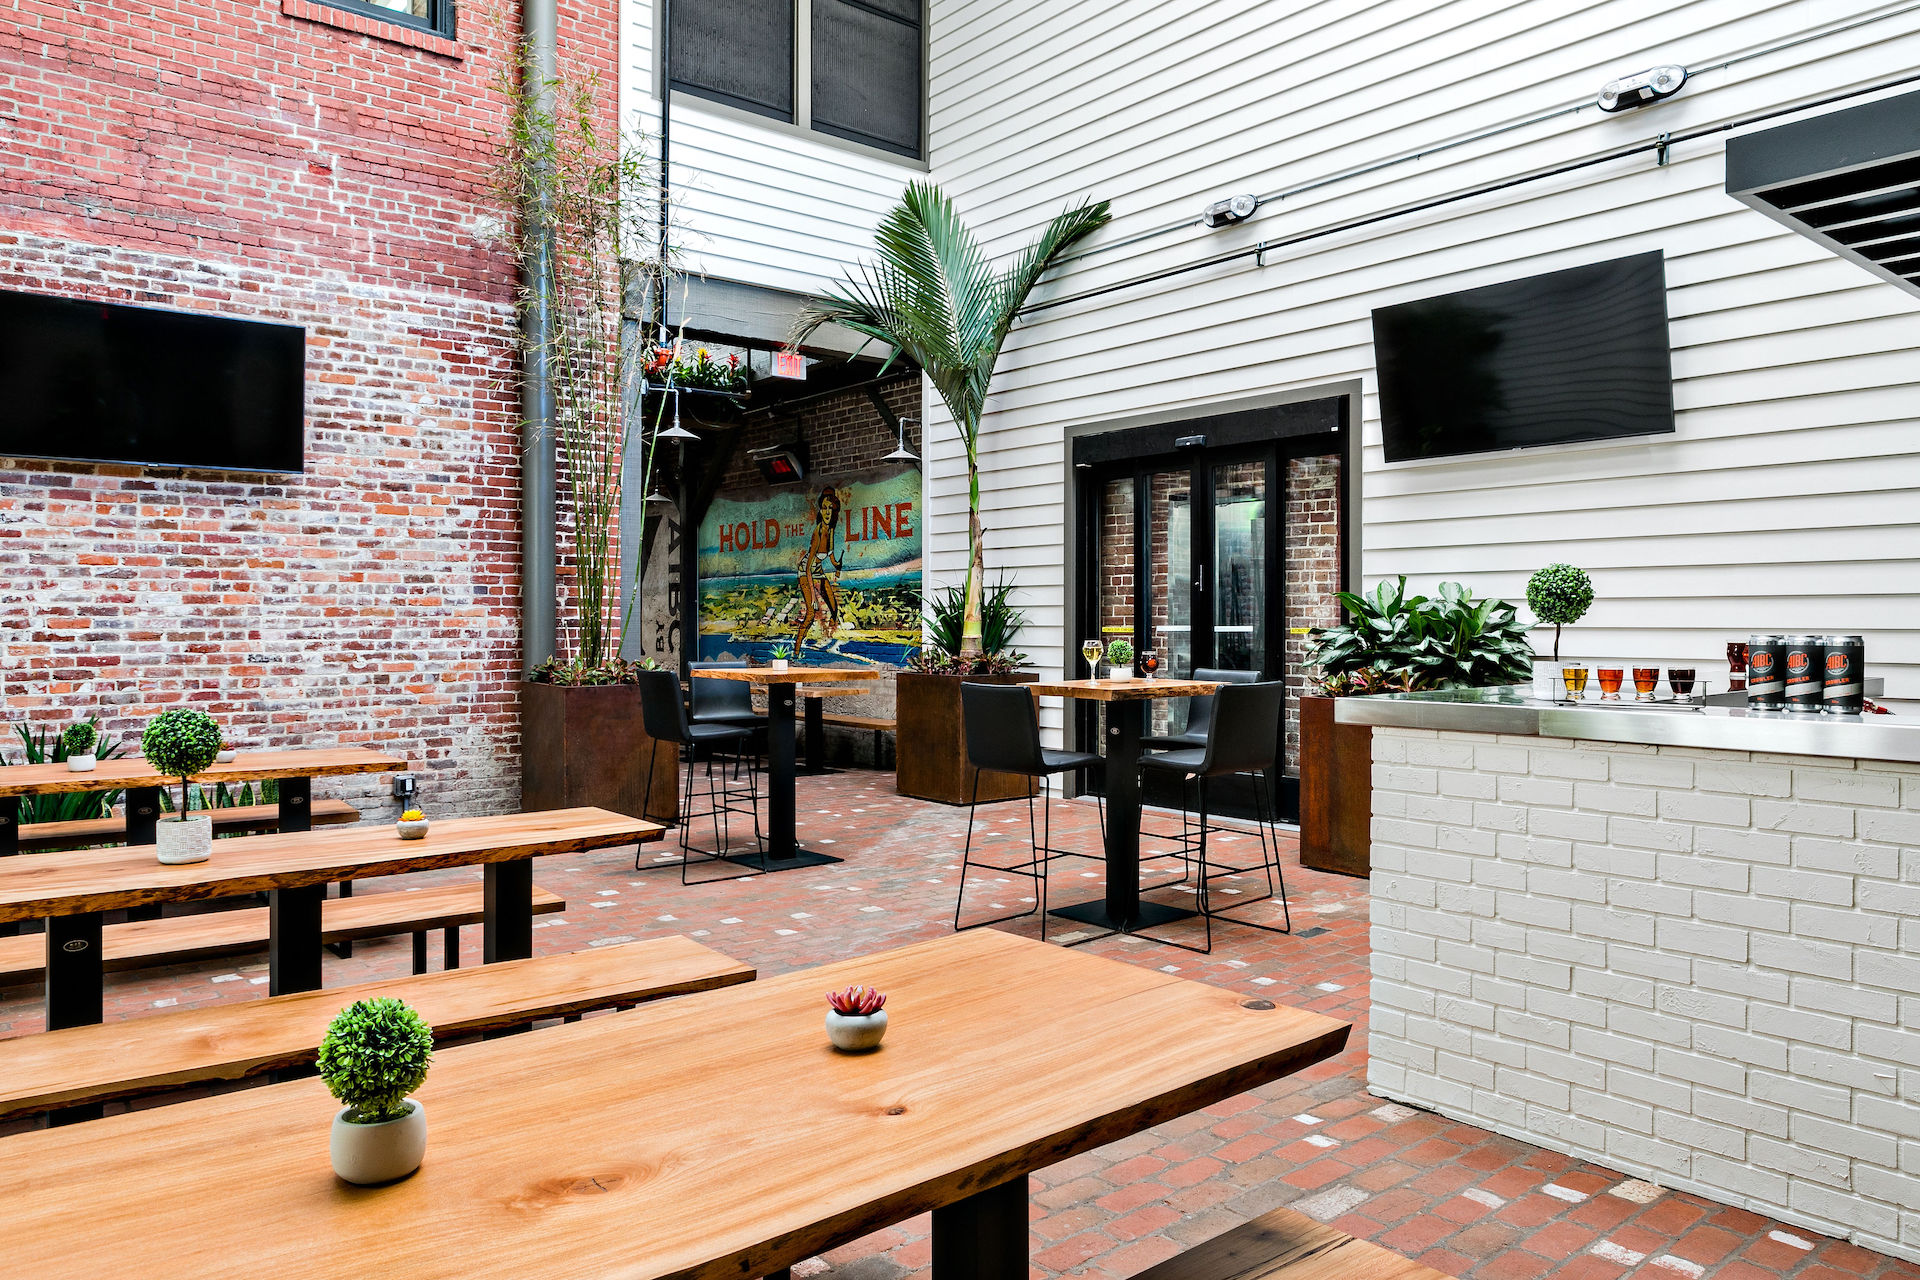 The Alley, by Amelia Island Brewing Company outside